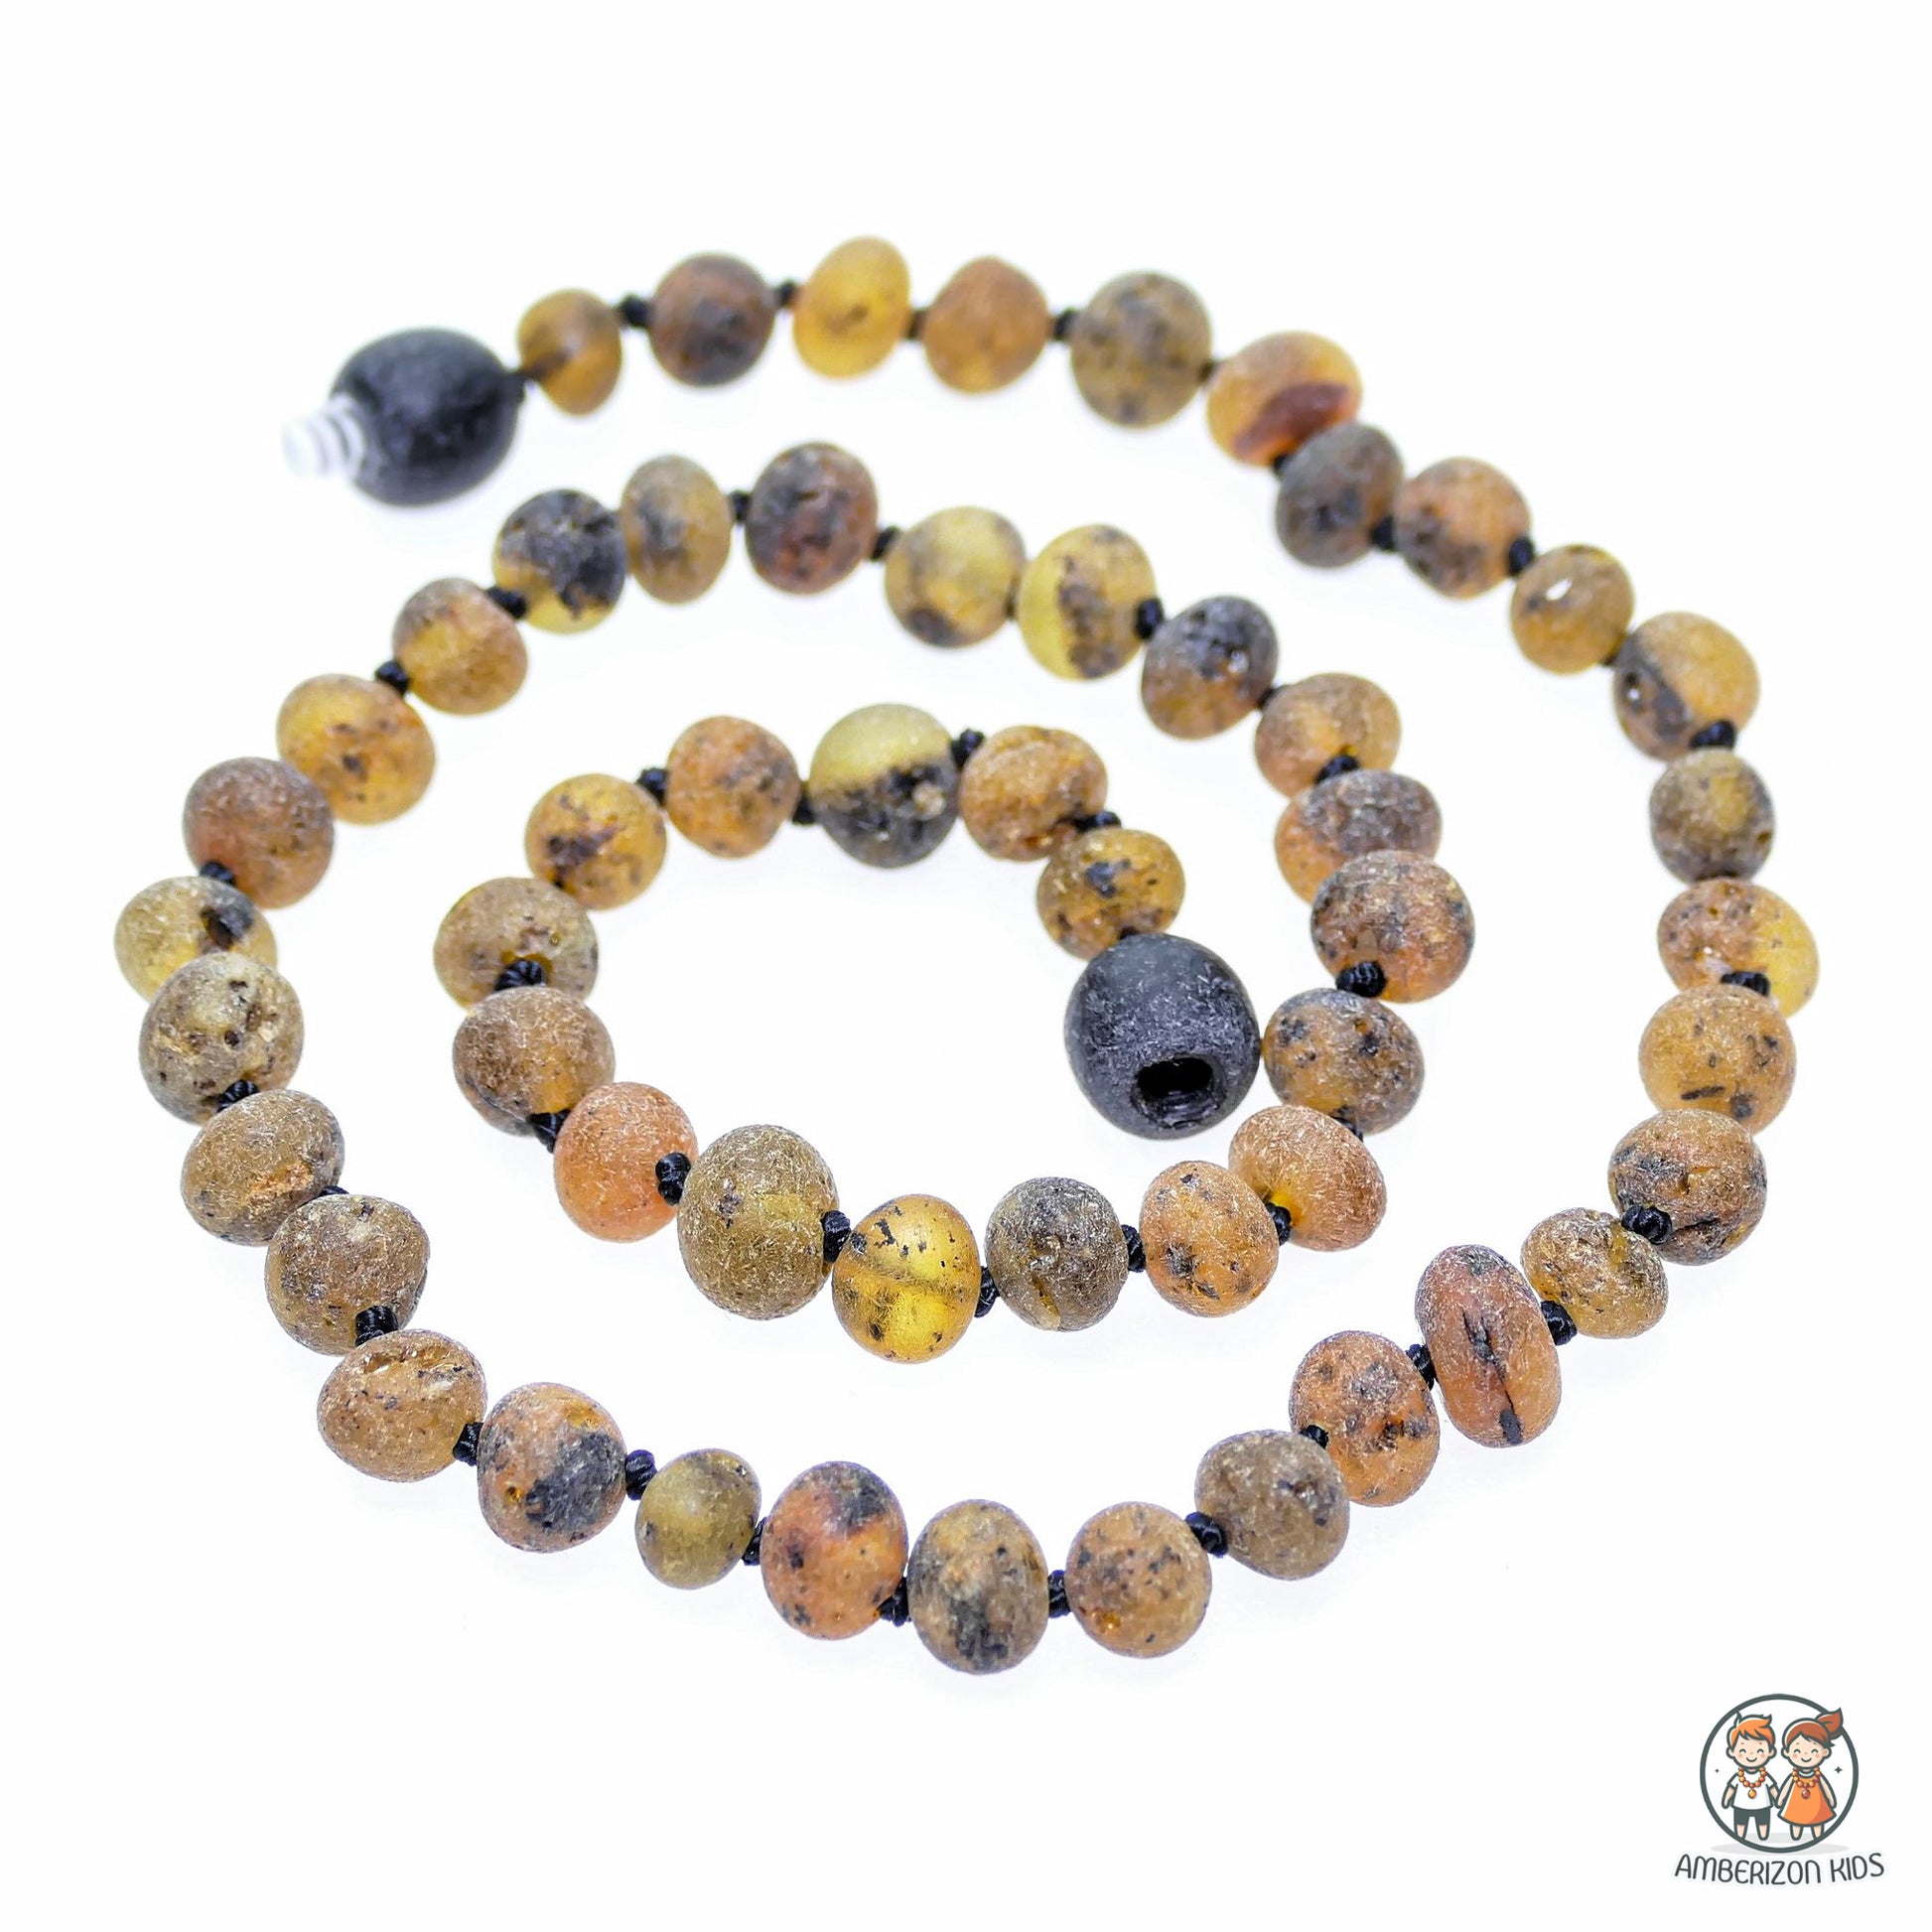 This is a short children’s amber necklace, crafted from 100% genuine Baltic amber